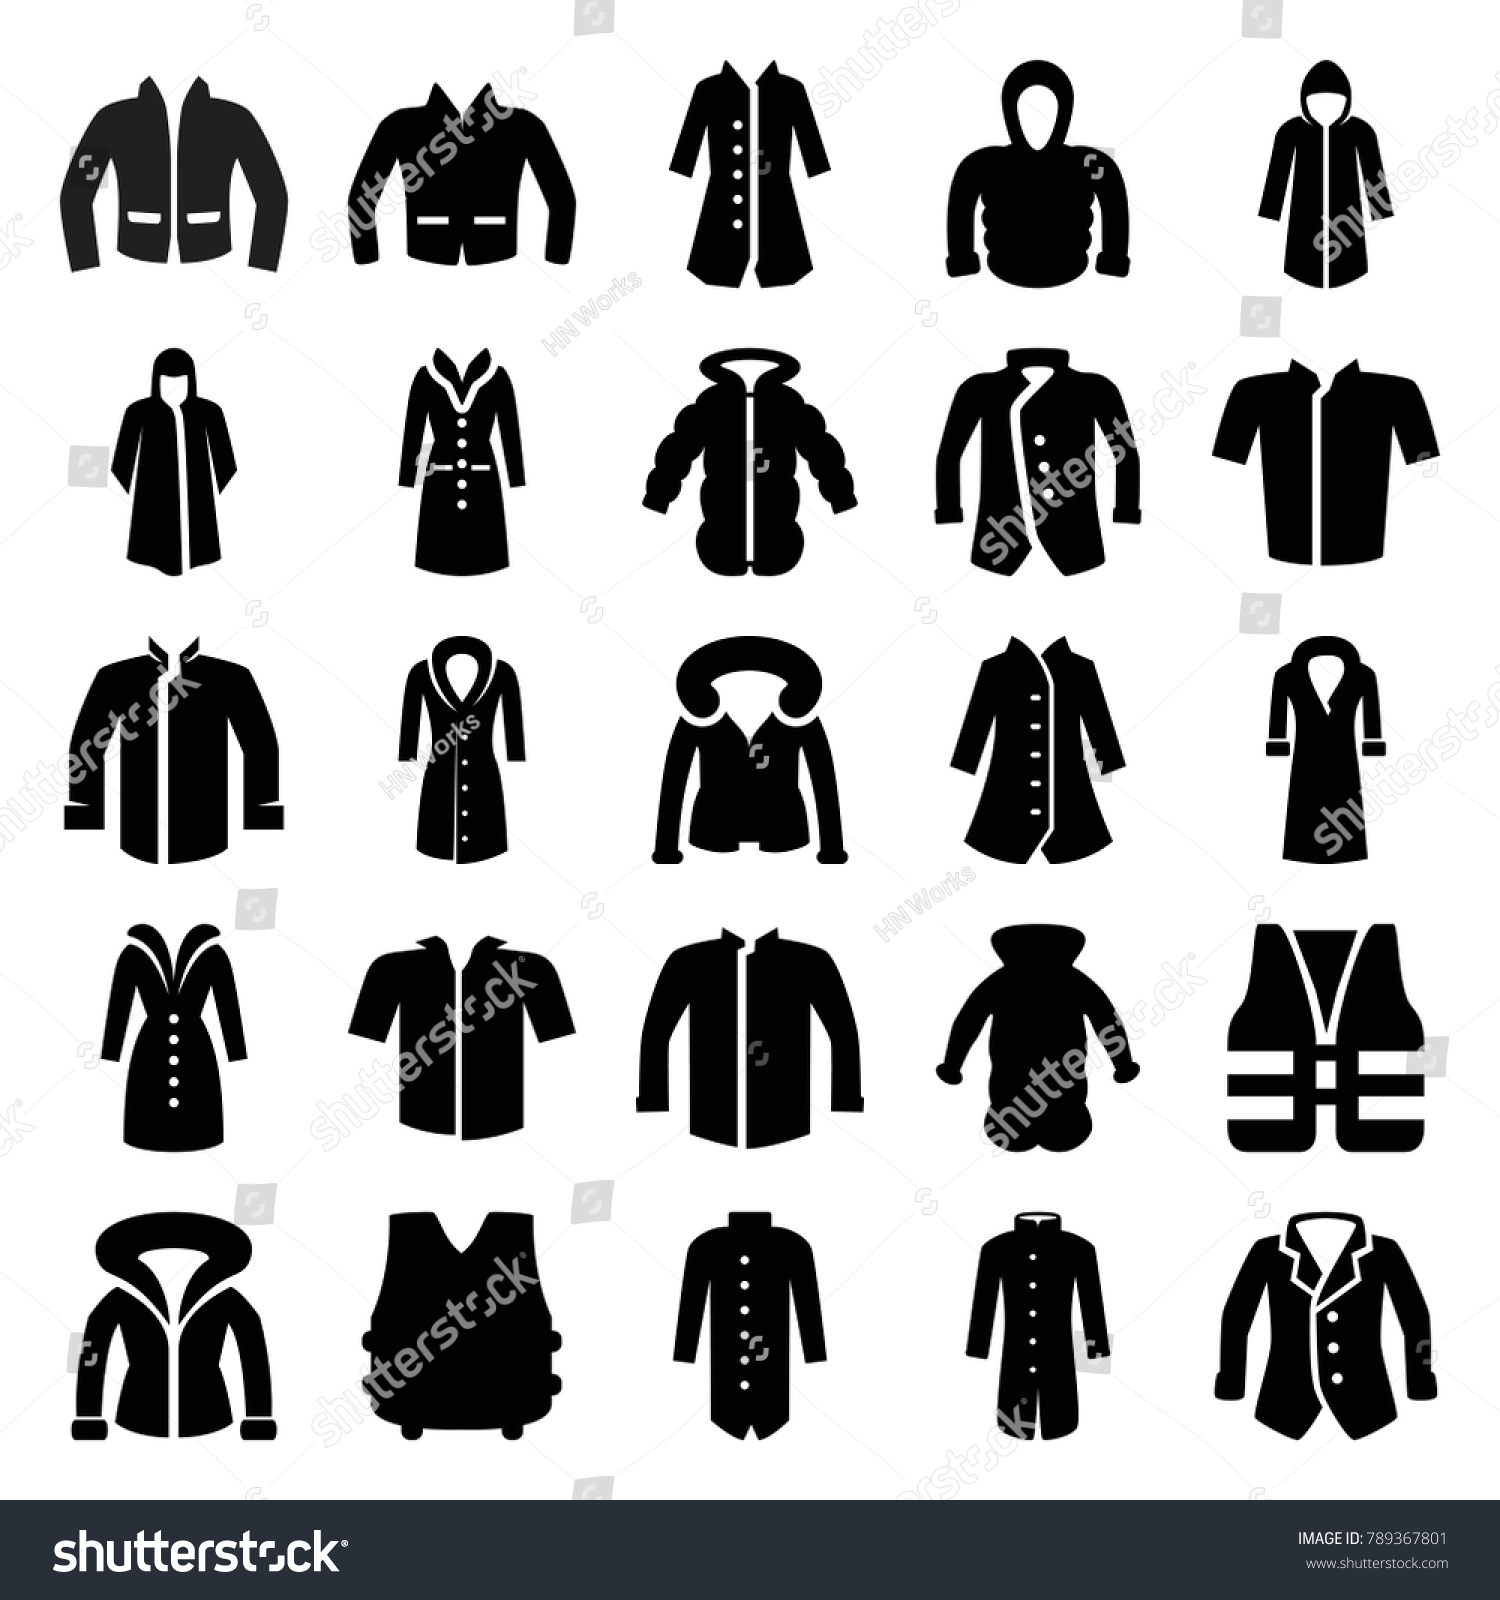 Jacket Icons Set 25 Editable Filled Stock Vector (Royalty Free ...